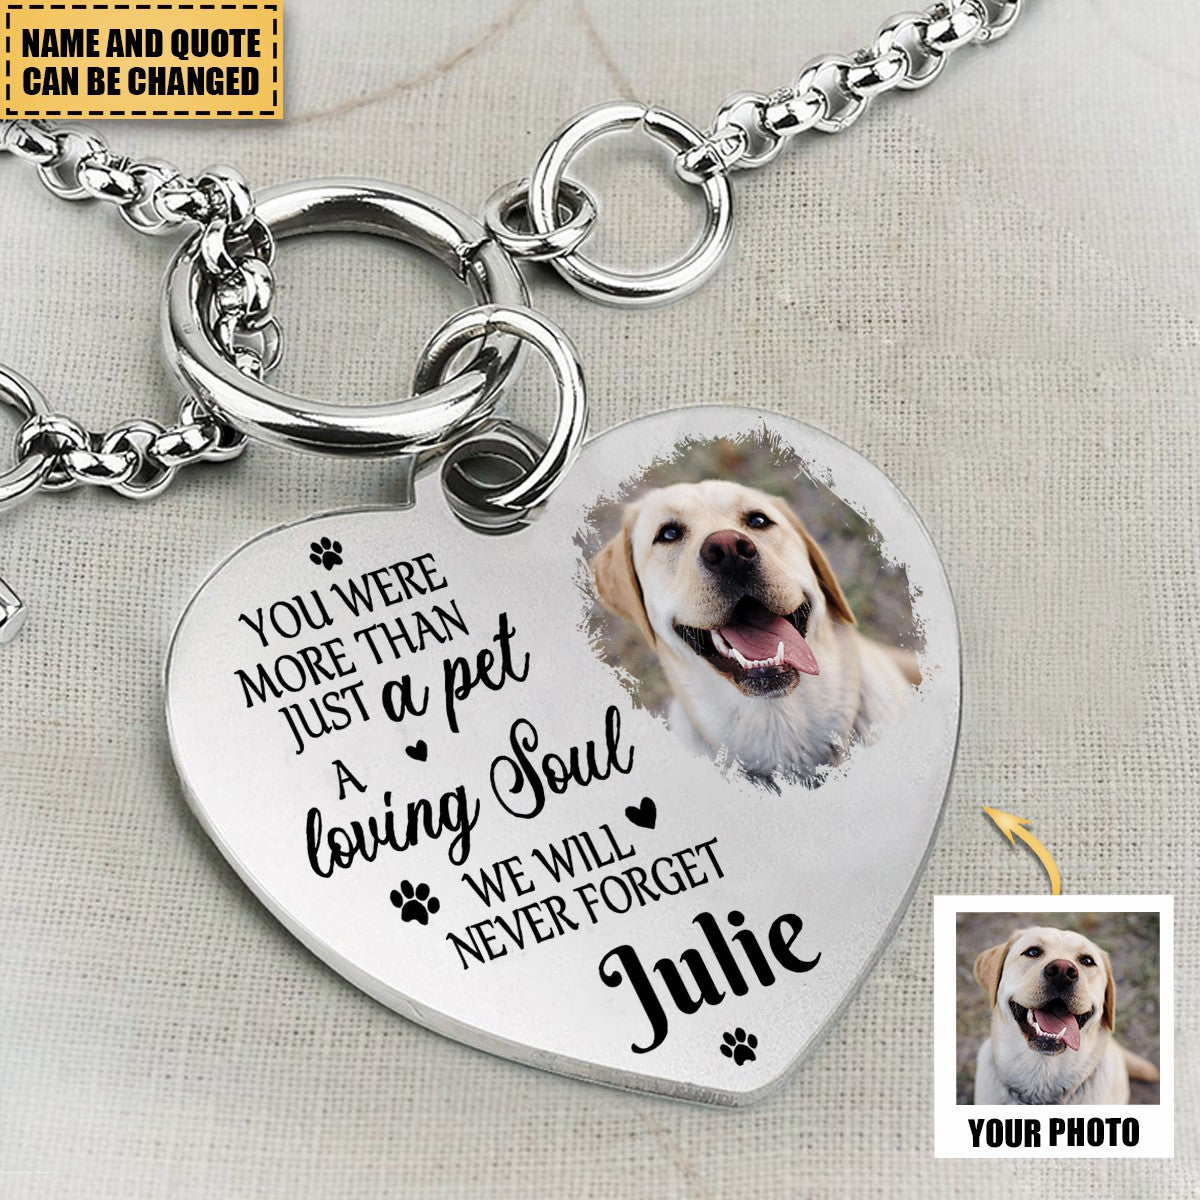 You Were More Than Just A Pet, A Loving Soul We Will Never Forget - Personalized Photo Heart Bracelet